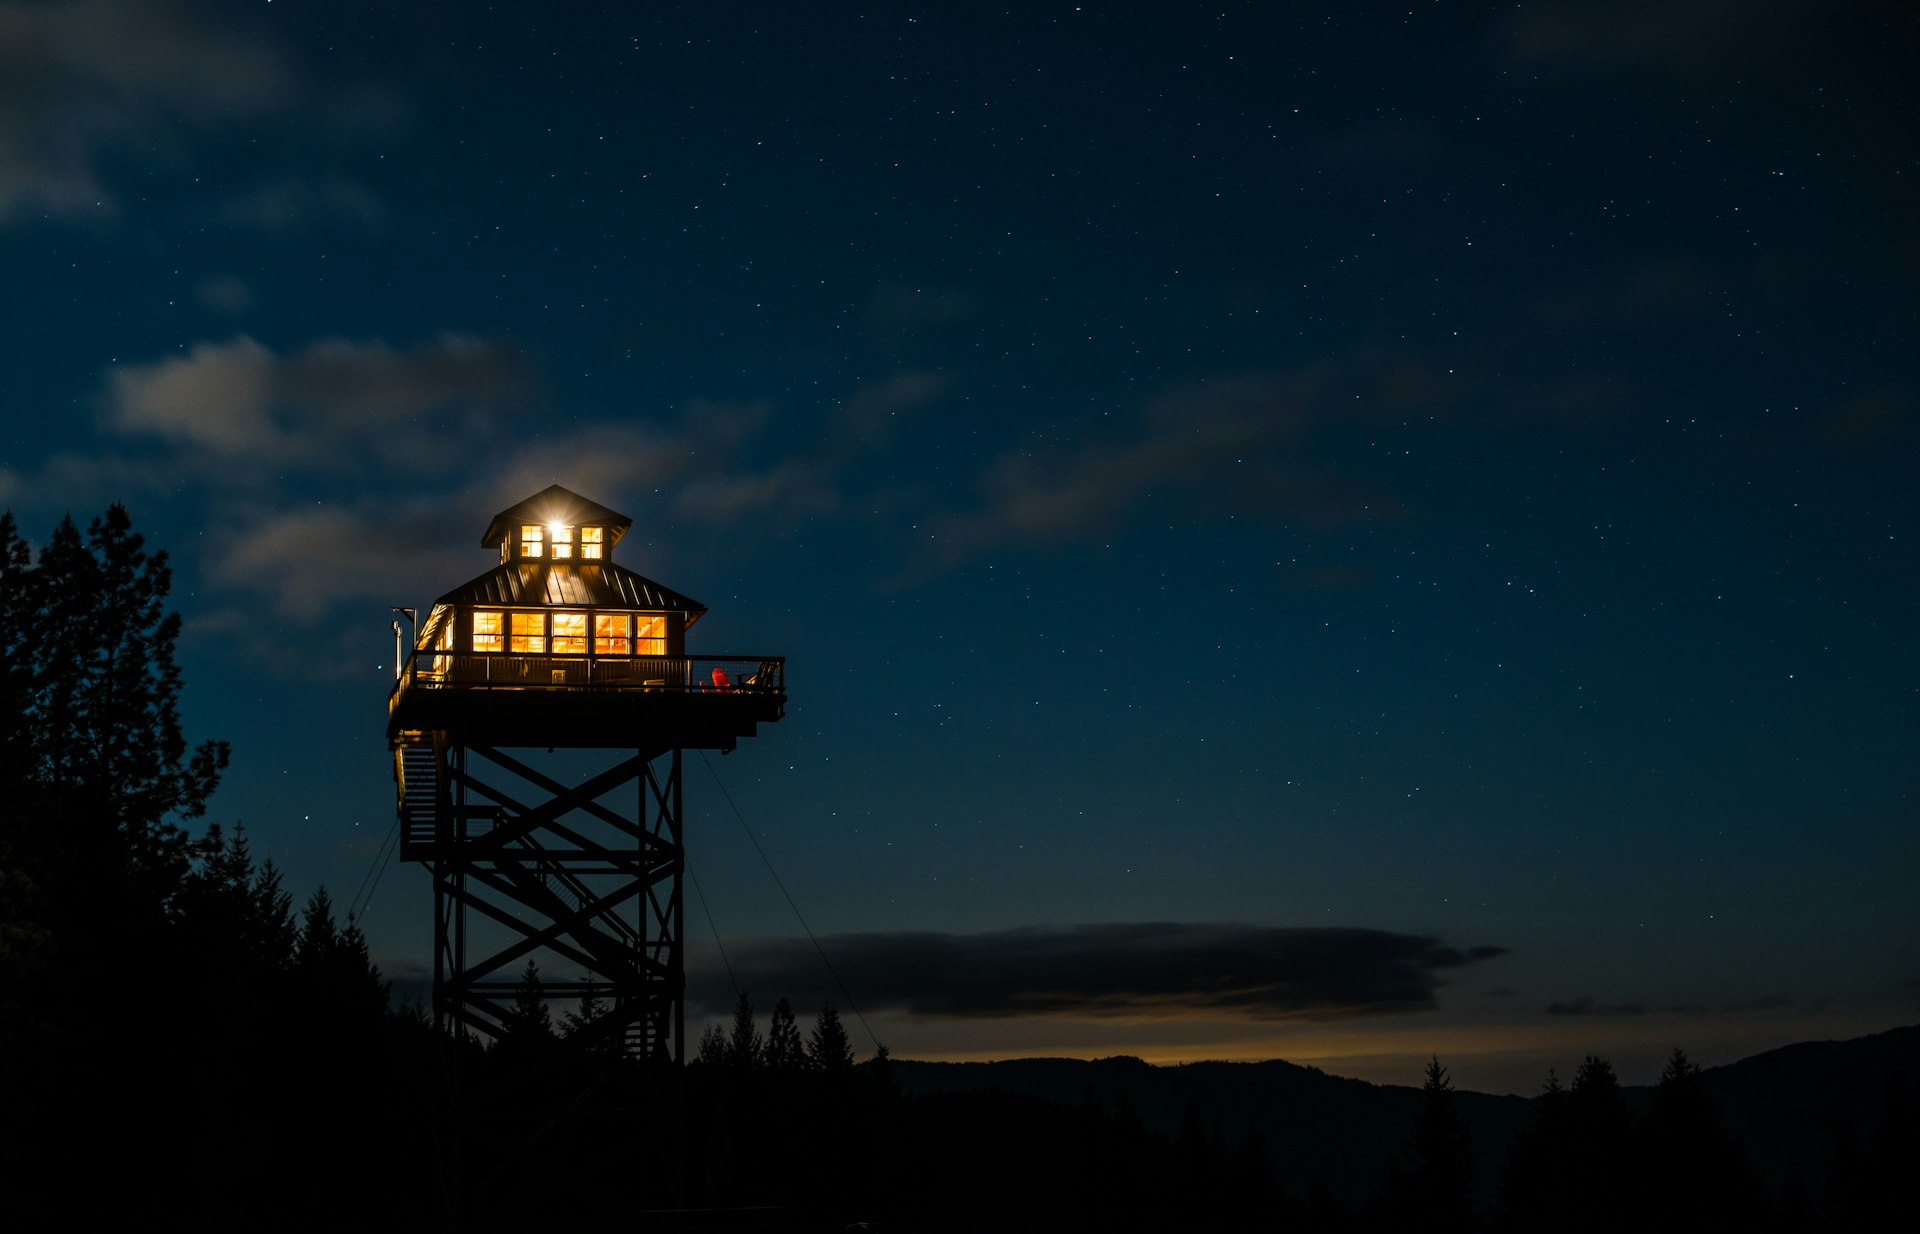 Nighttime view of the Summit Prairie fire lookout tower in Tiller, Oregon